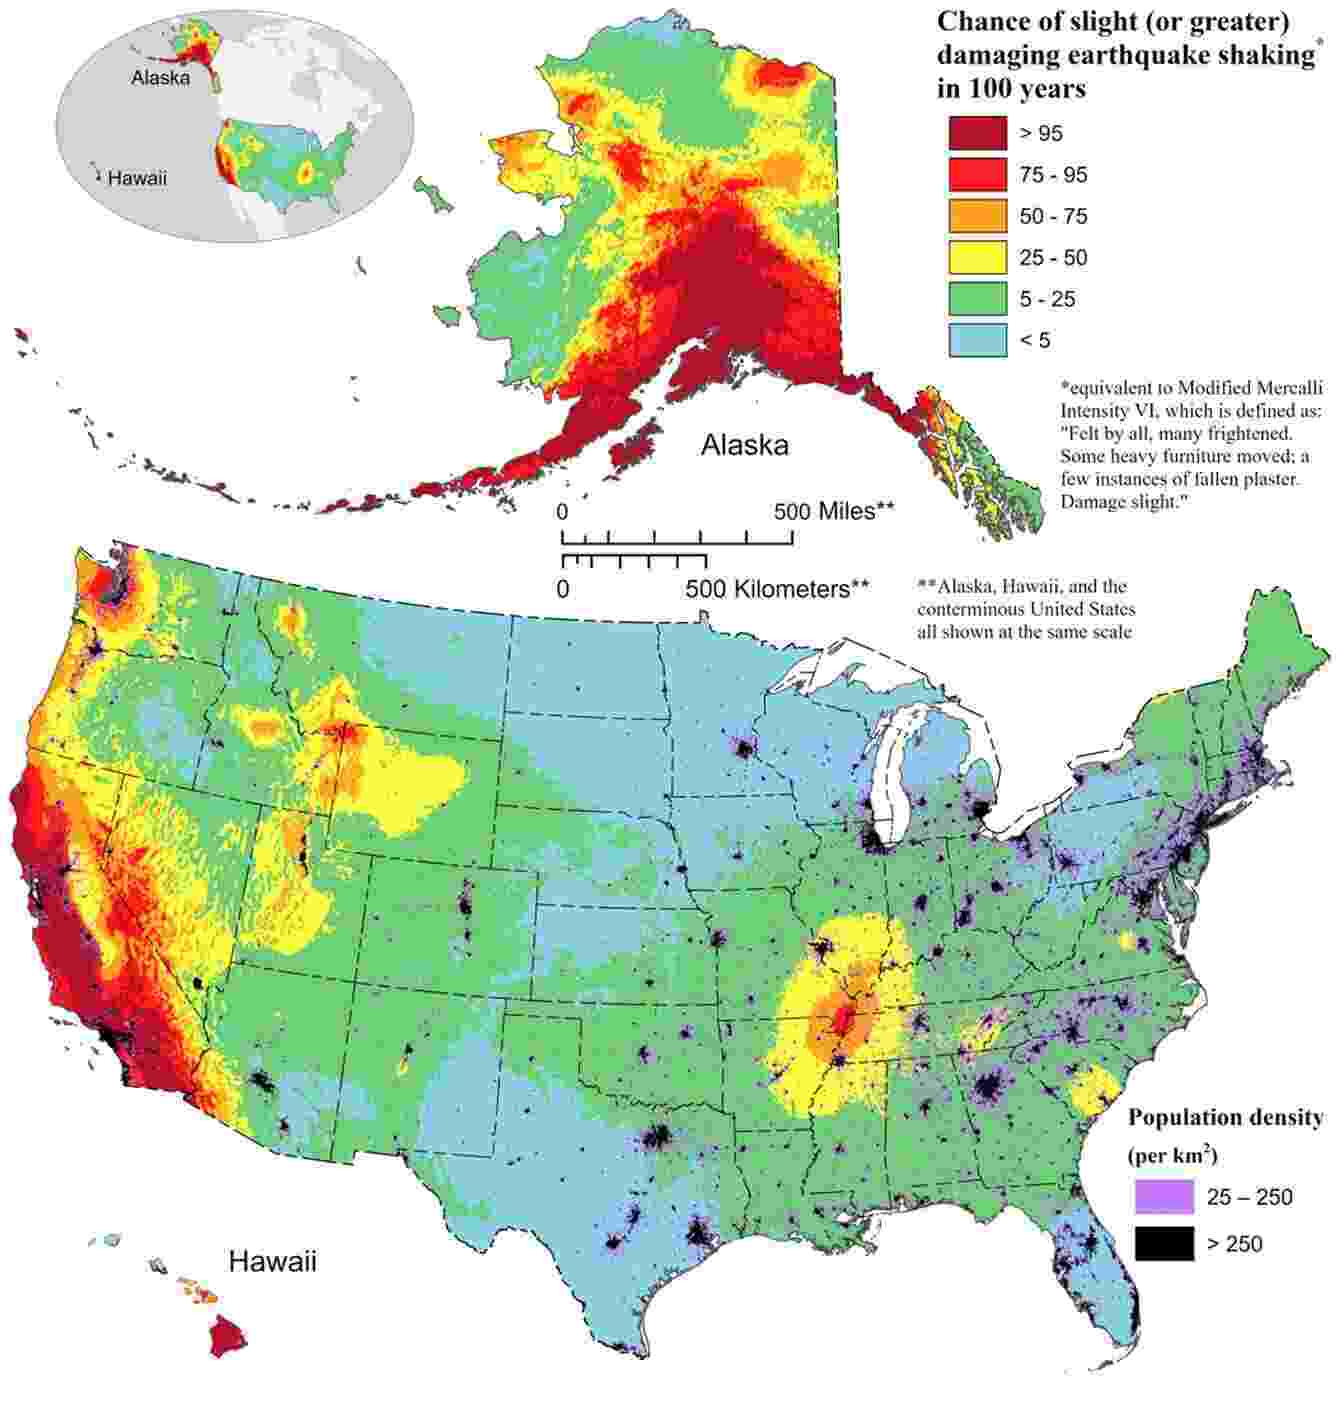 National Seismic Hazard Model (2023). Map displays the likelihood of damaging earthquake shaking in the United States over the next 100 years.